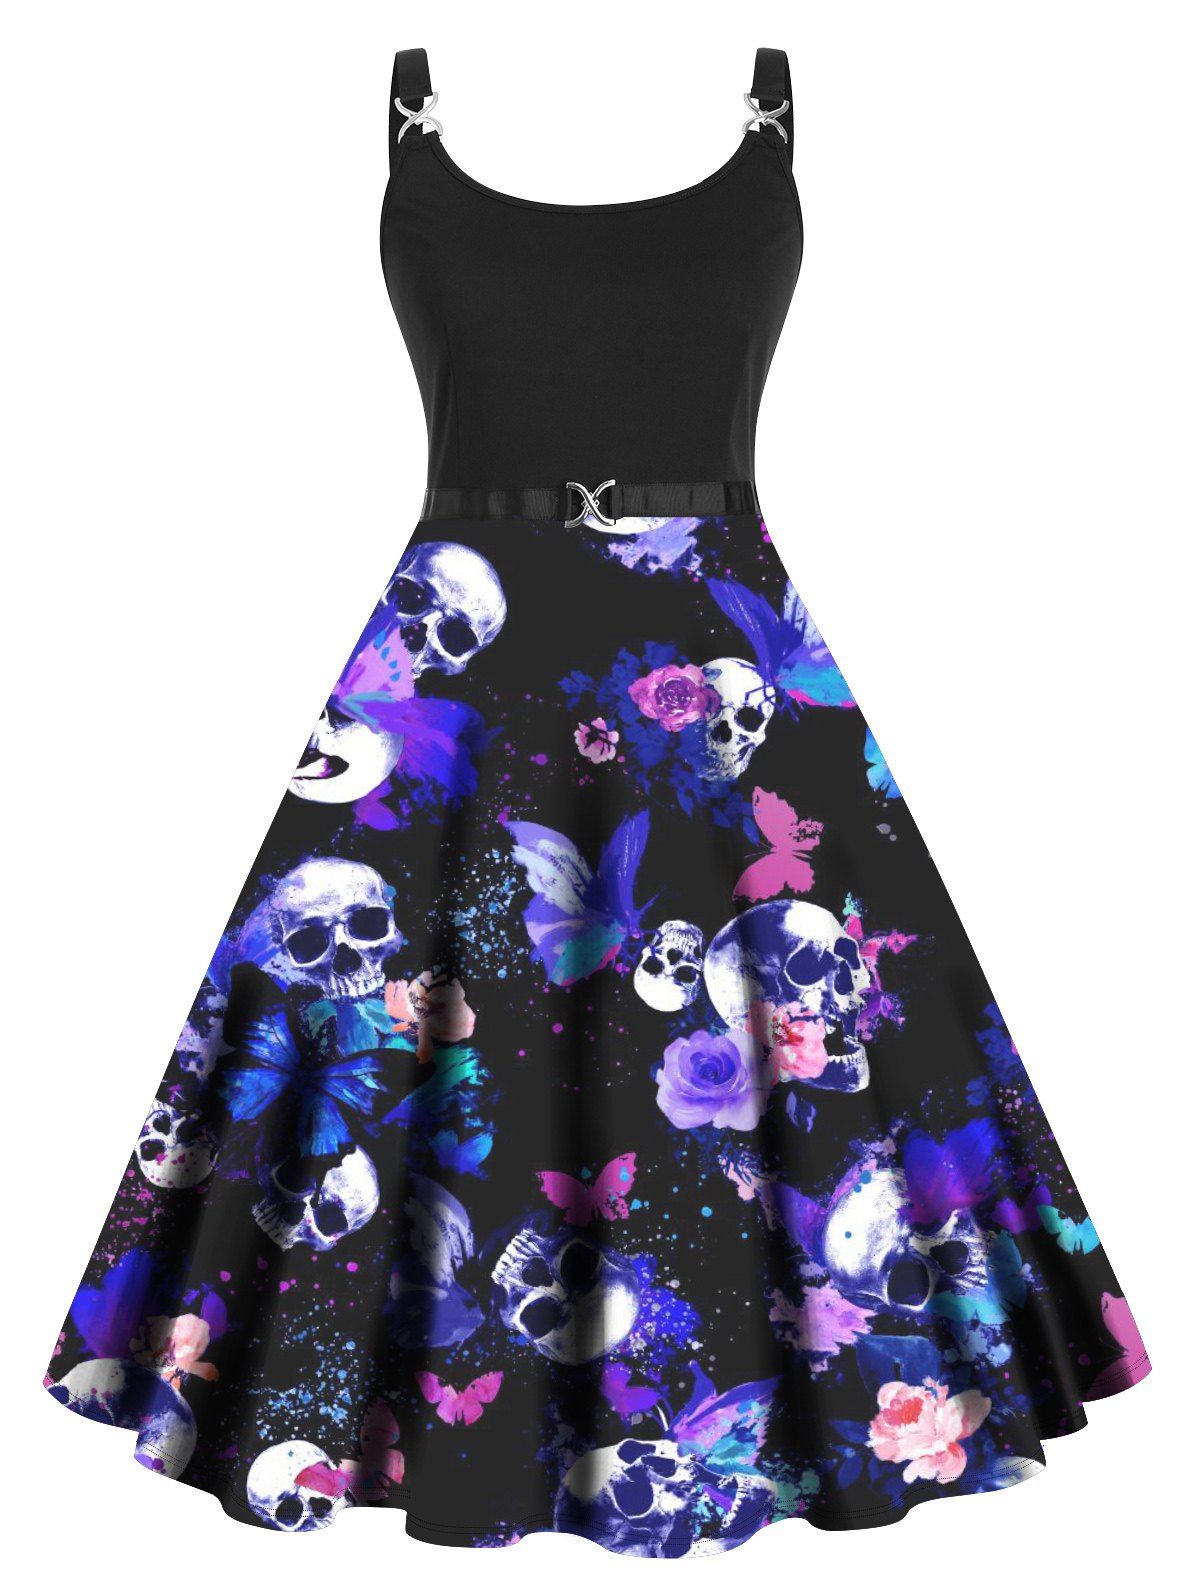 Plus Size Dress Gothic Dress Skull Flower Butterfly Print High Waisted Twisted Ring A Line Midi Dress - DEEP BLUE 3X